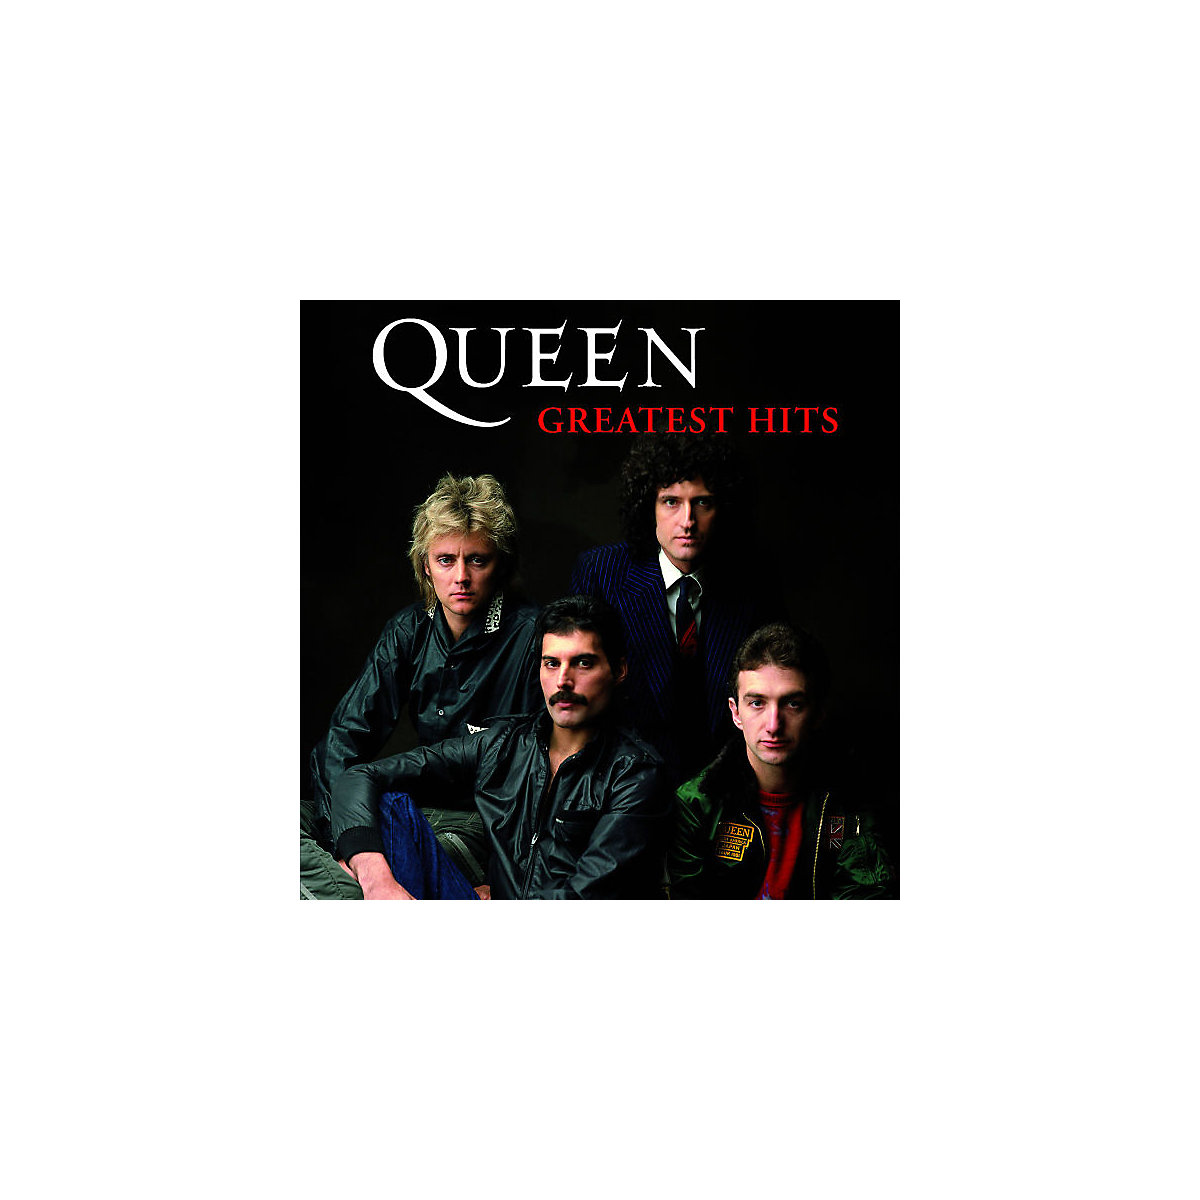 Universal CD Queen Greatest Hits 1 (2010 Remaster)